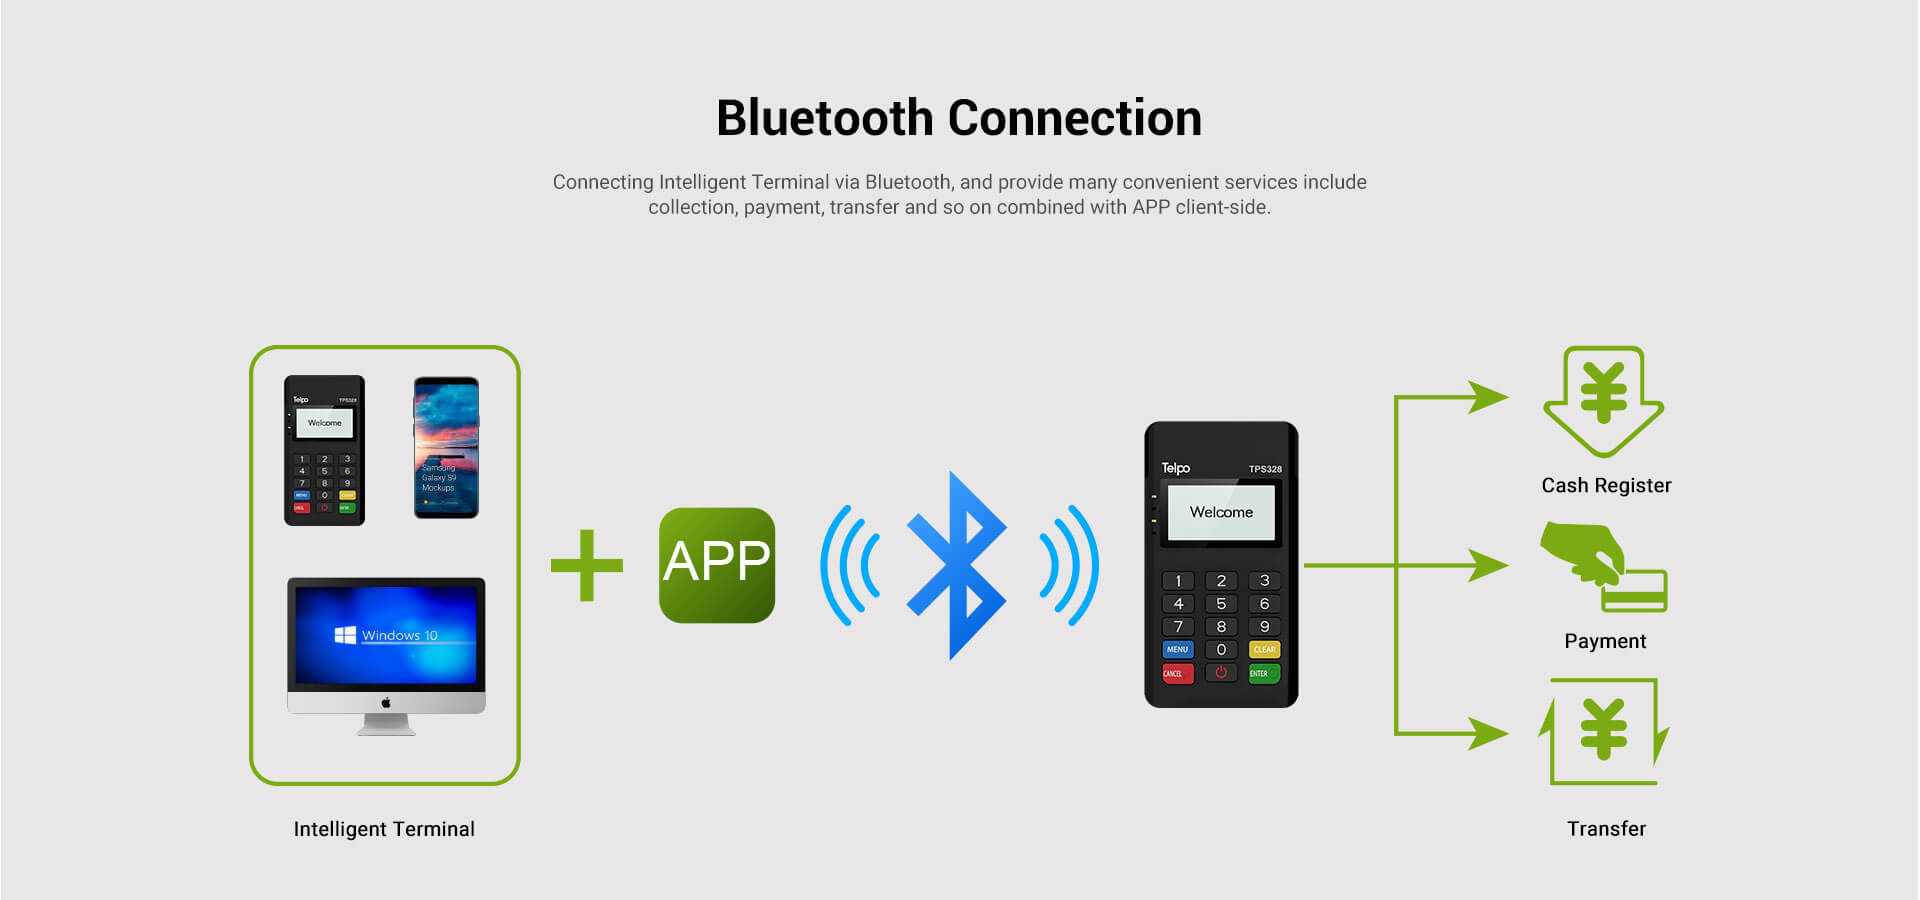 Bluethooth WIFI mPOS machine for mobile phone payment